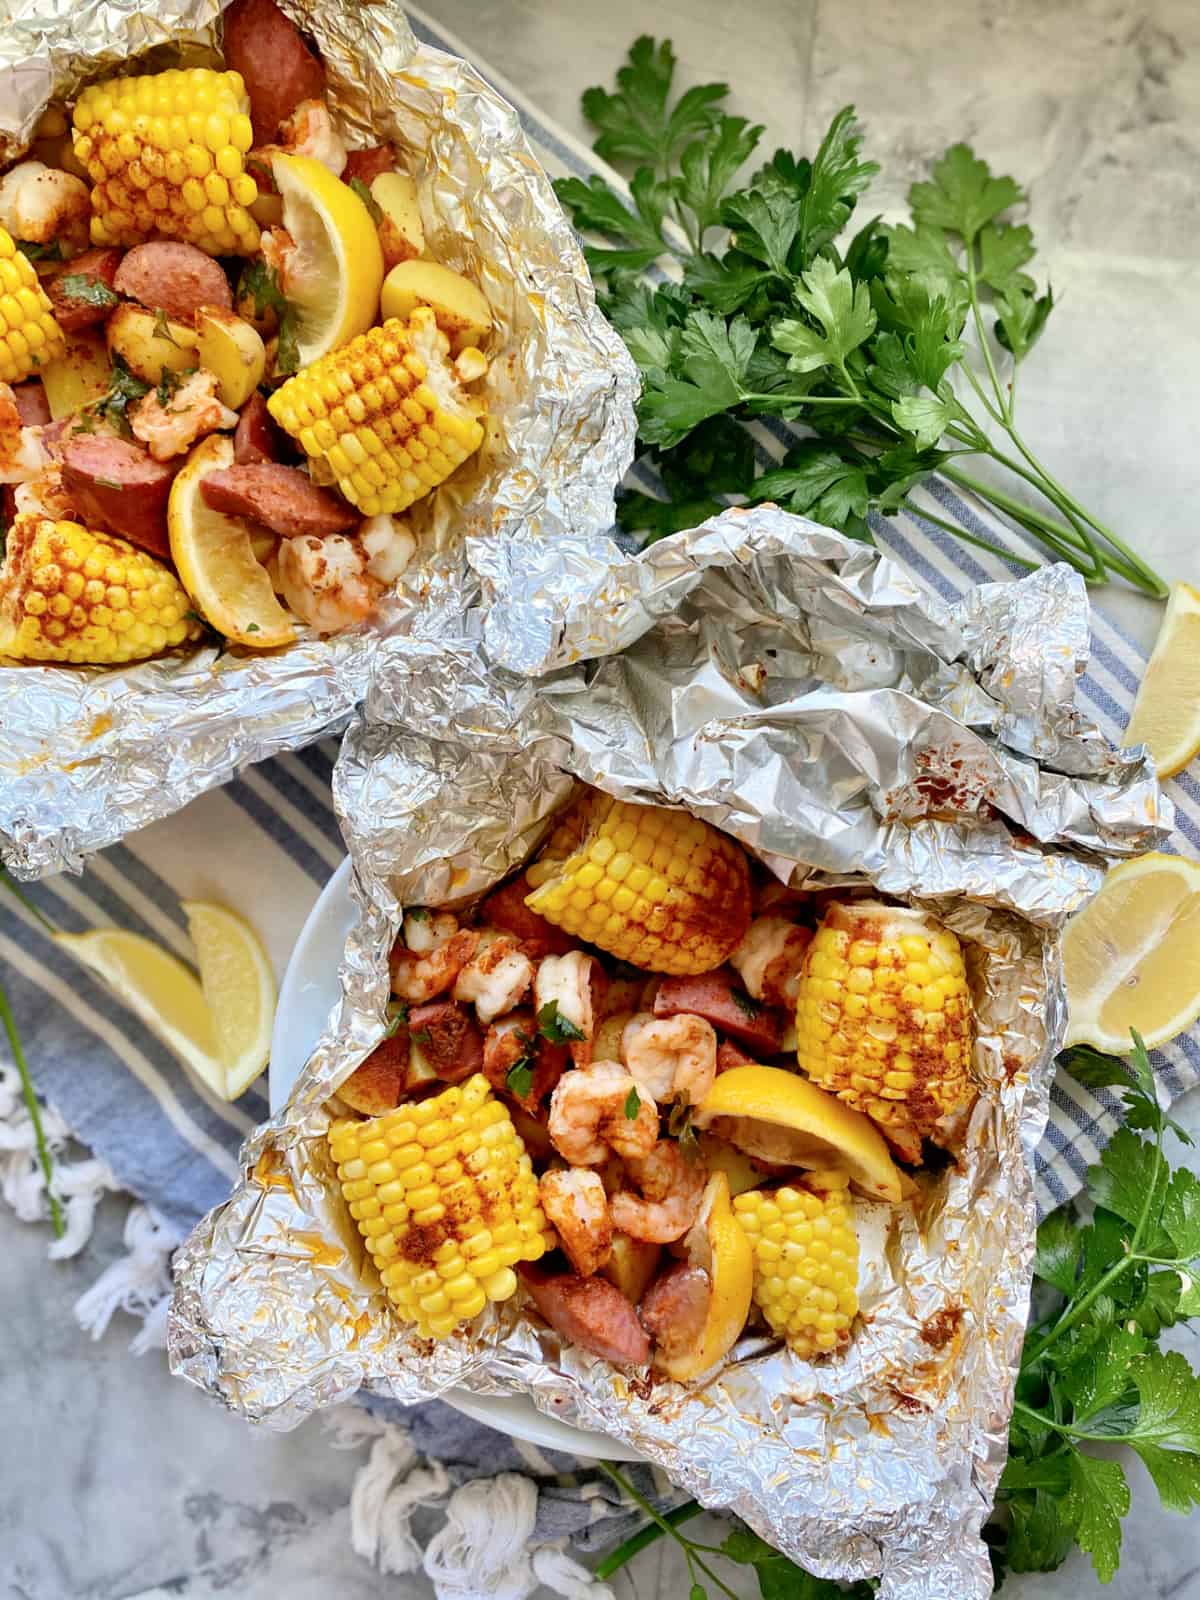 Top view of two foil packets filled with shrimp, corn, sausage, and lemon.